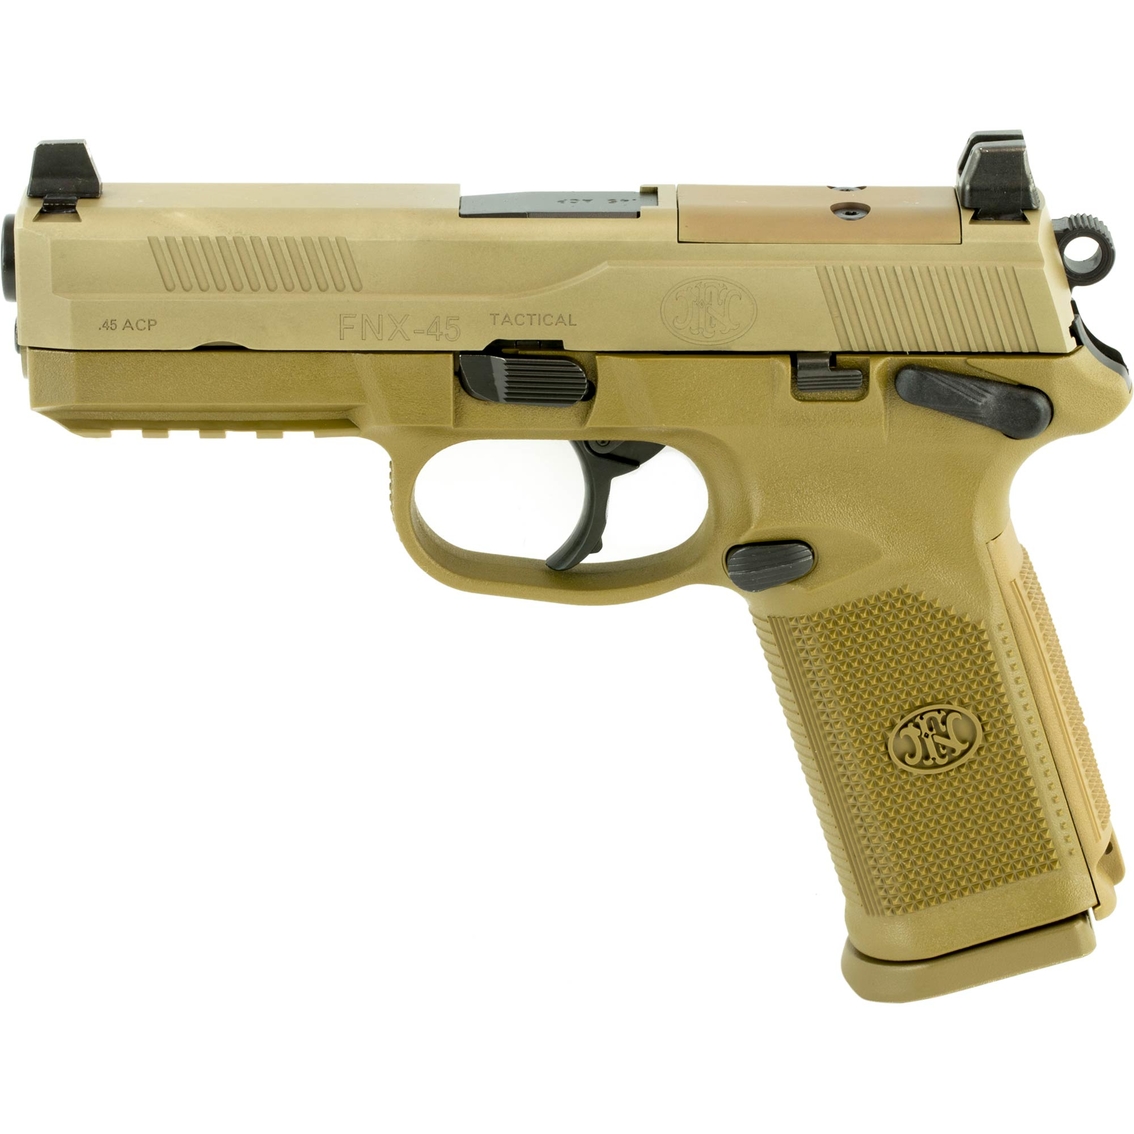 FN FNX-45 Tactical 45 ACP 4.5 in. Barrel 10 Rds 3-Mags NS Pistol Flat Dark Earth - Image 2 of 3